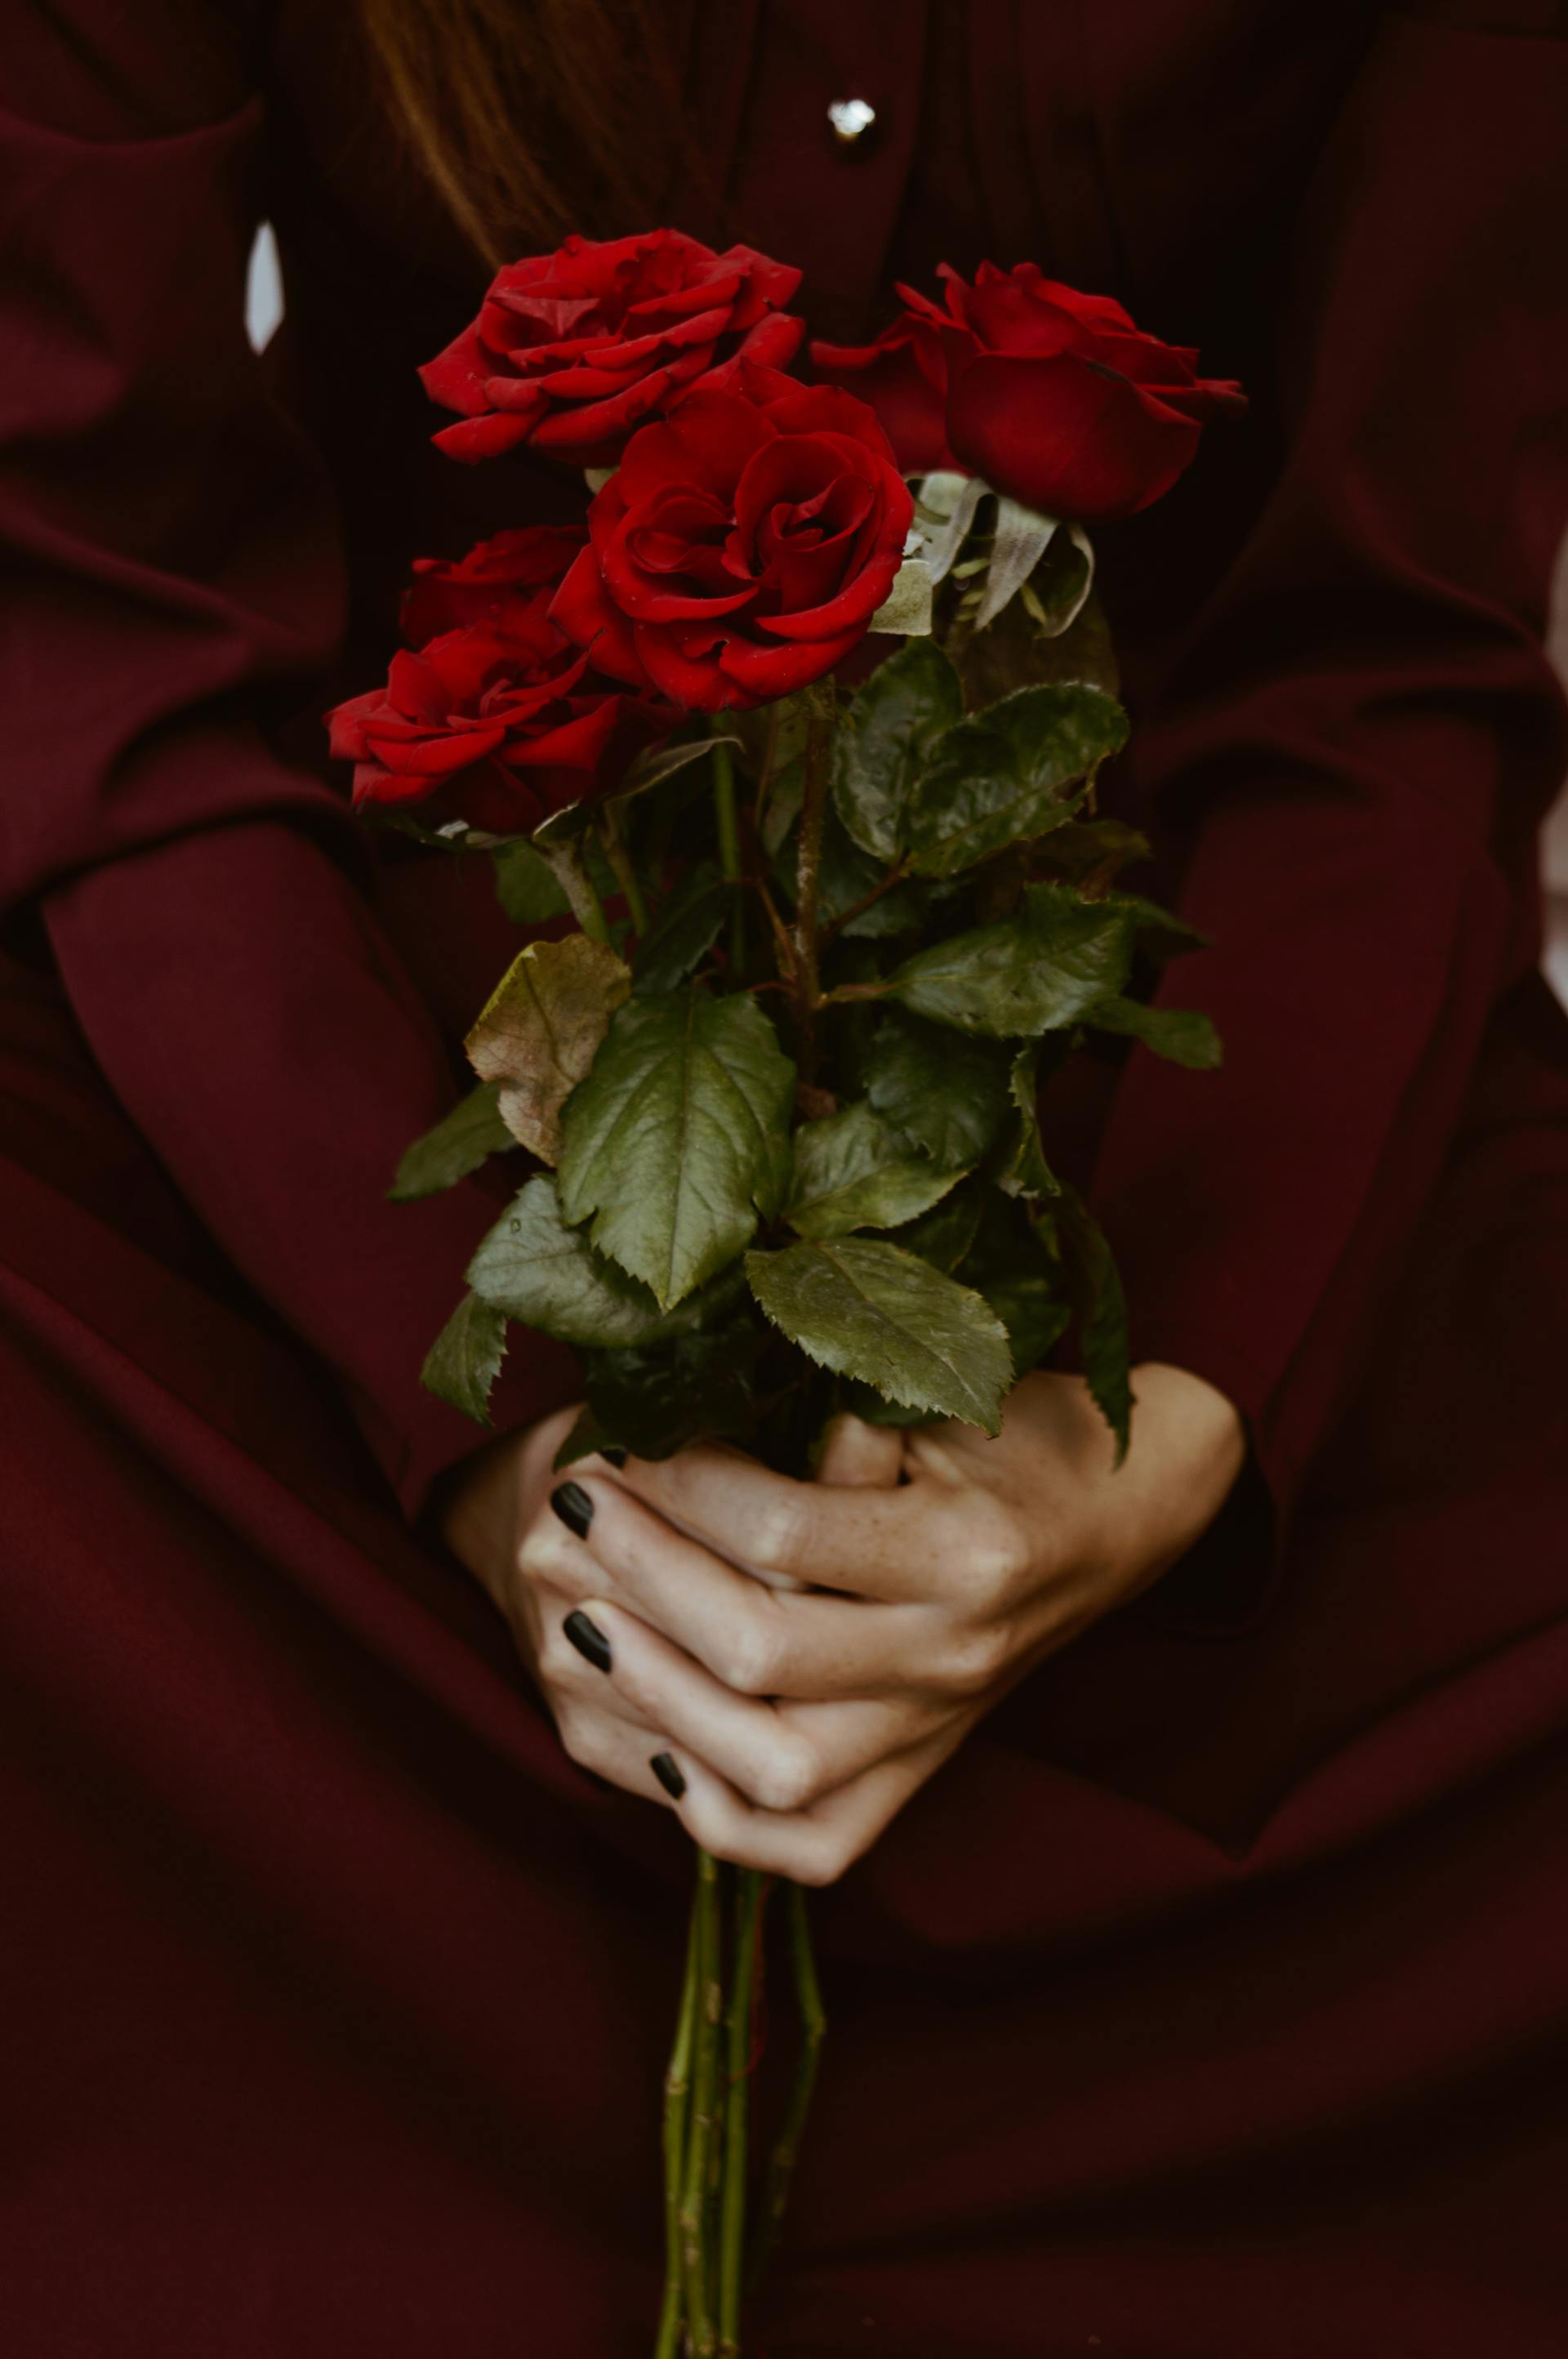 A woman in a red dress | Source: Pexels